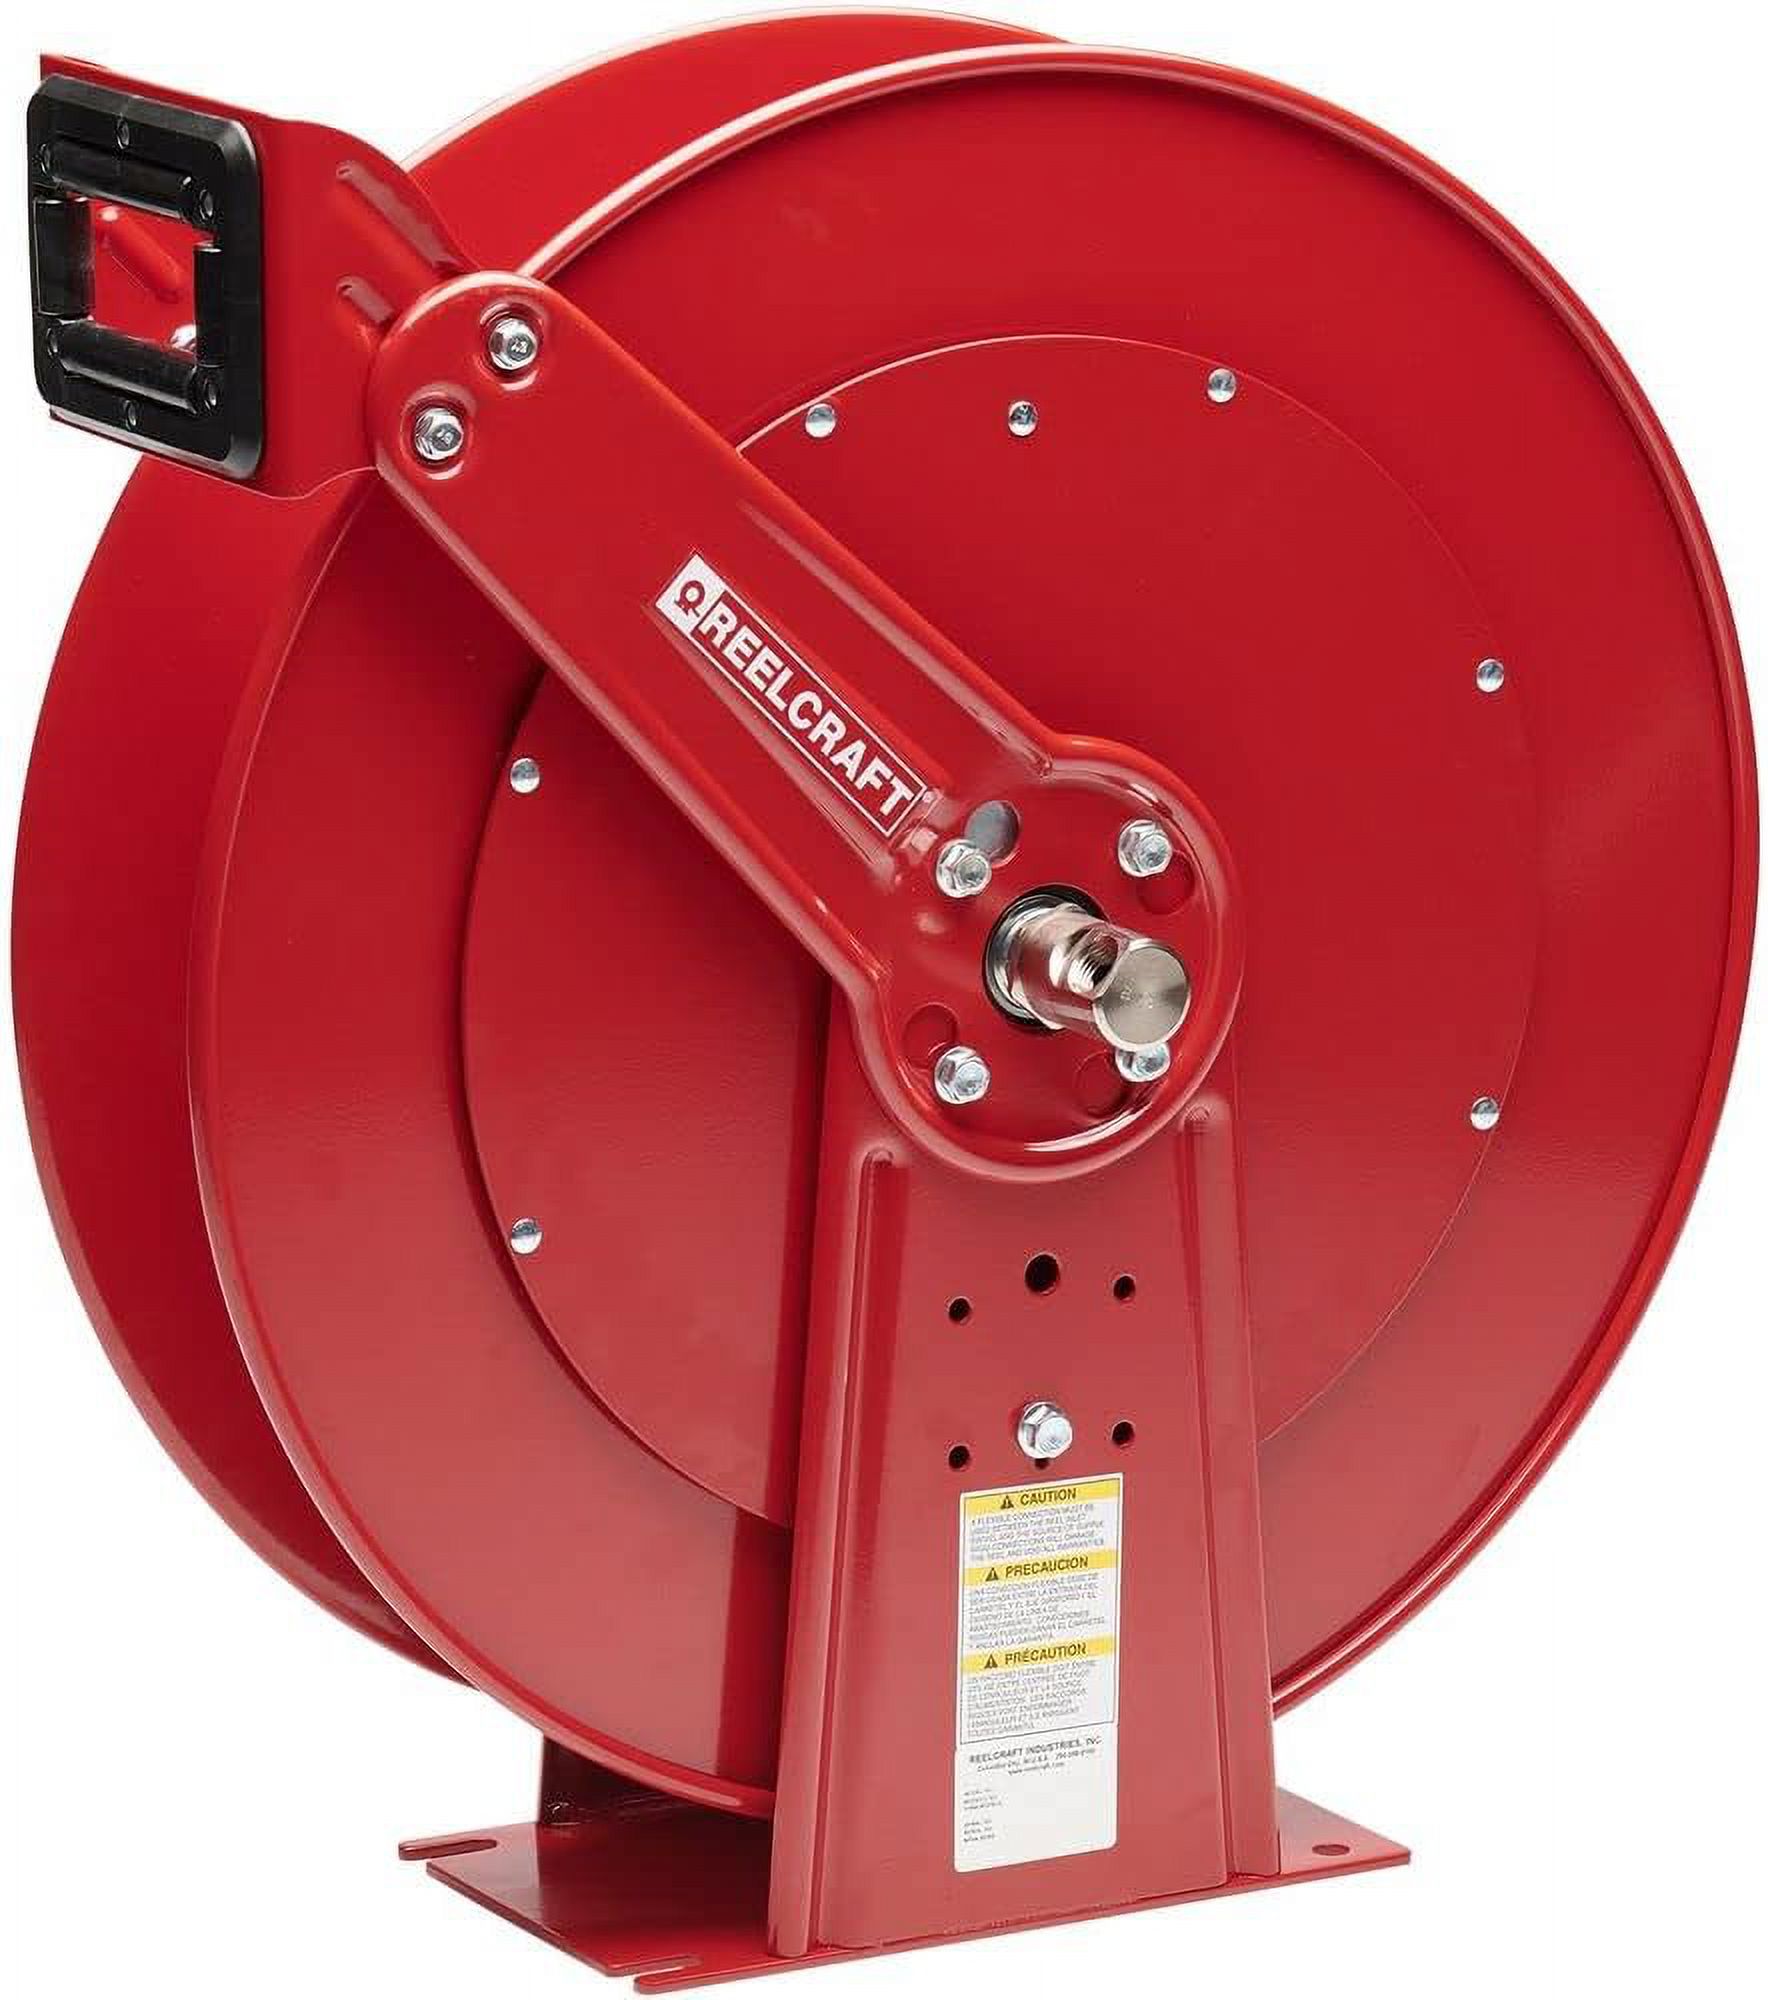 Reelcraft-PW81000 OHP 3/8 In. x 100 Ft. Spring Retractable Pressure Wash Hose Reel Without Hose, Steel - image 2 of 3